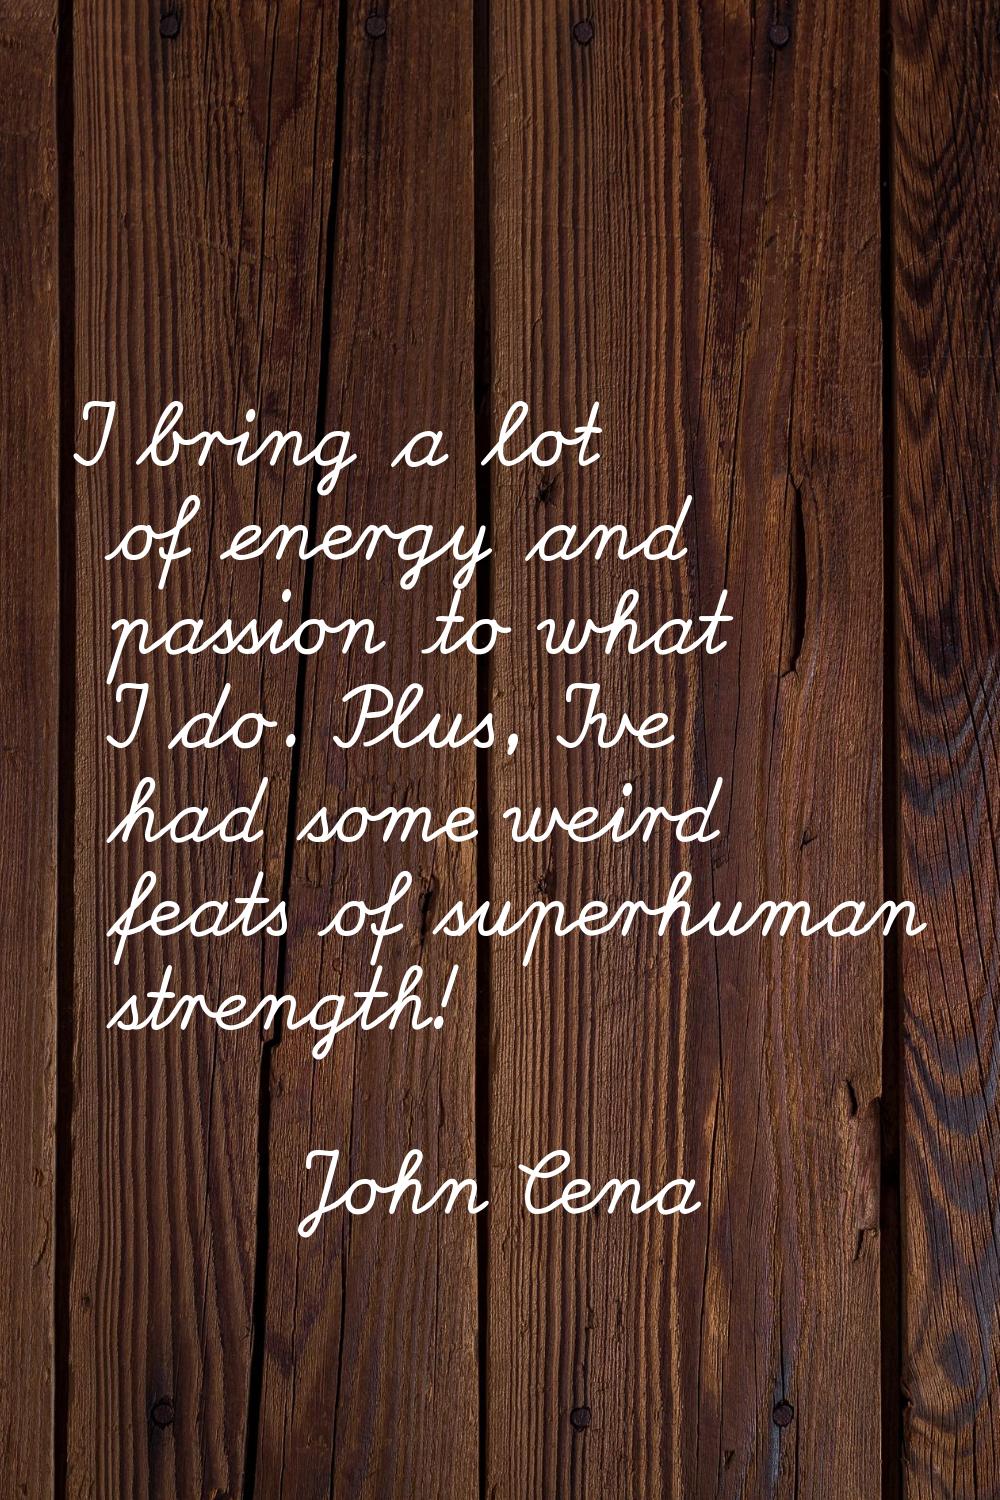 I bring a lot of energy and passion to what I do. Plus, I've had some weird feats of superhuman str